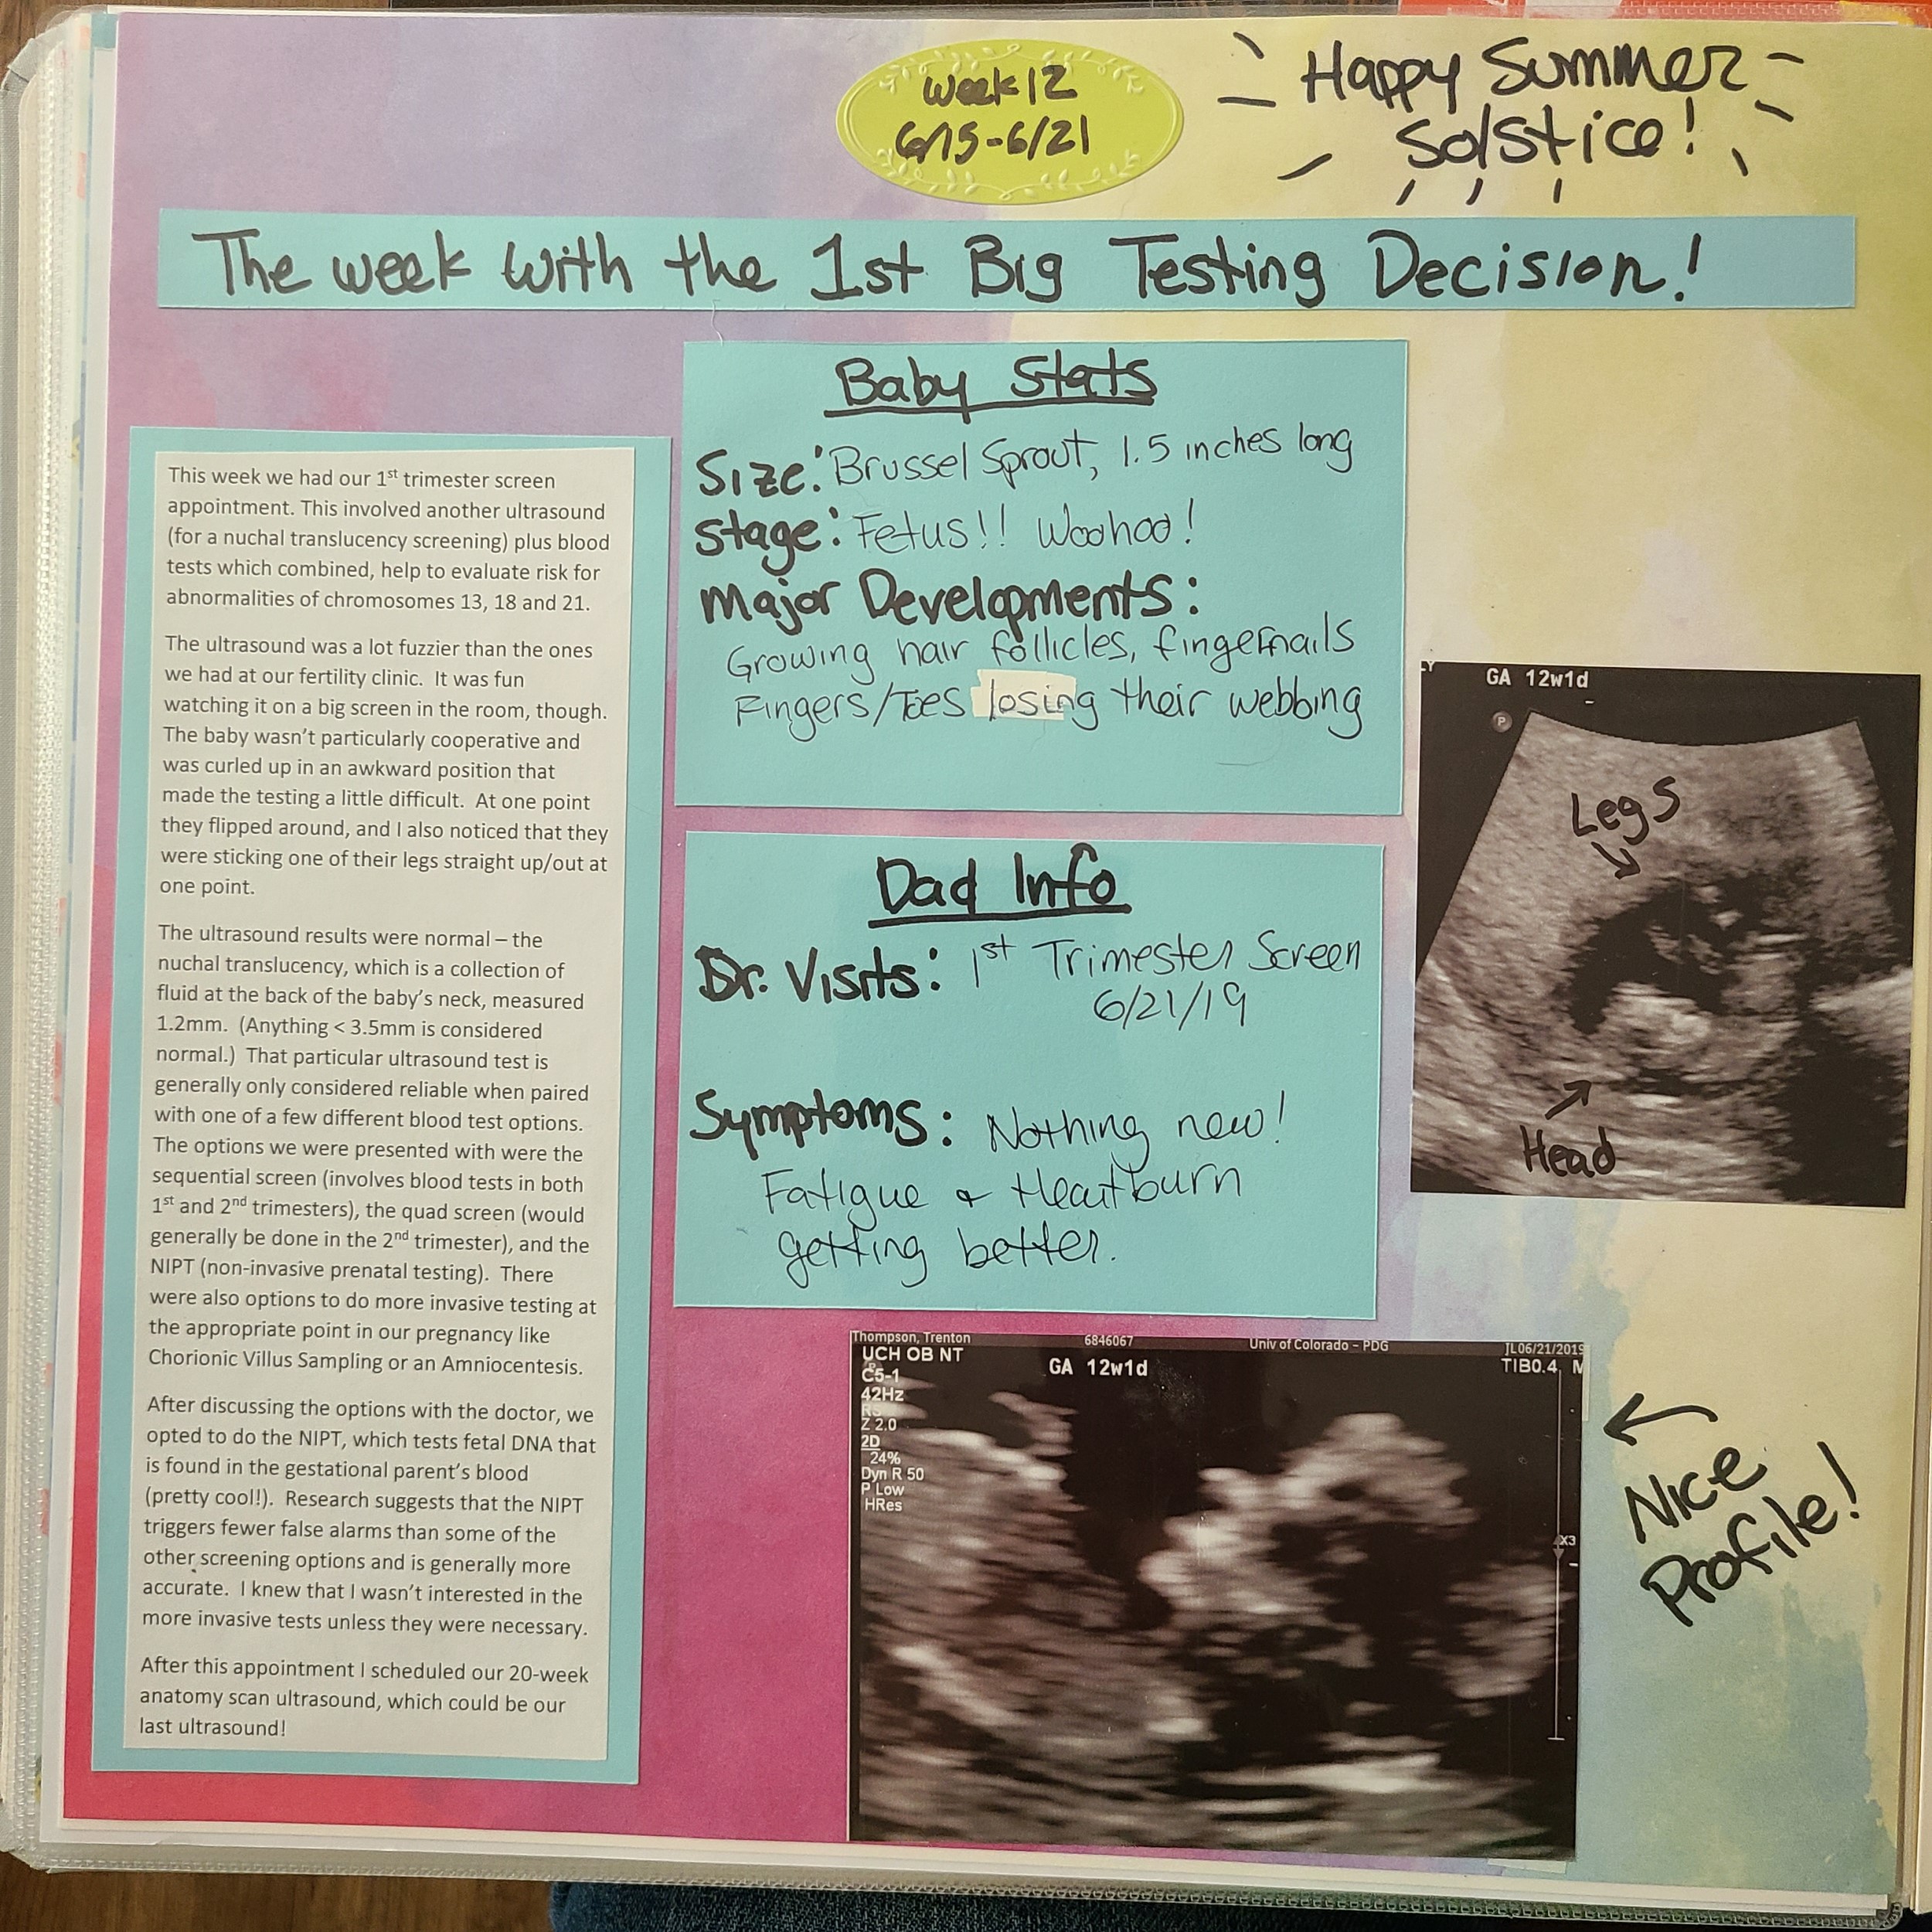 Week 12 scrapbook page, with a multicolor background that transitions from dark pink in the bottom left corner to light green in the top right corner, with sage green, yellow, and purple in the middle. There are two blurry ultrasound photos, one zoomed in of the baby's profile captured "Nice Profile!" and the other zoomed out showing the whole baby curled up in the uterus, head on the bottom and legs curled up on top, with legs and head labeled. "Happy Summer Solstice" is noted on the top right of of the page.